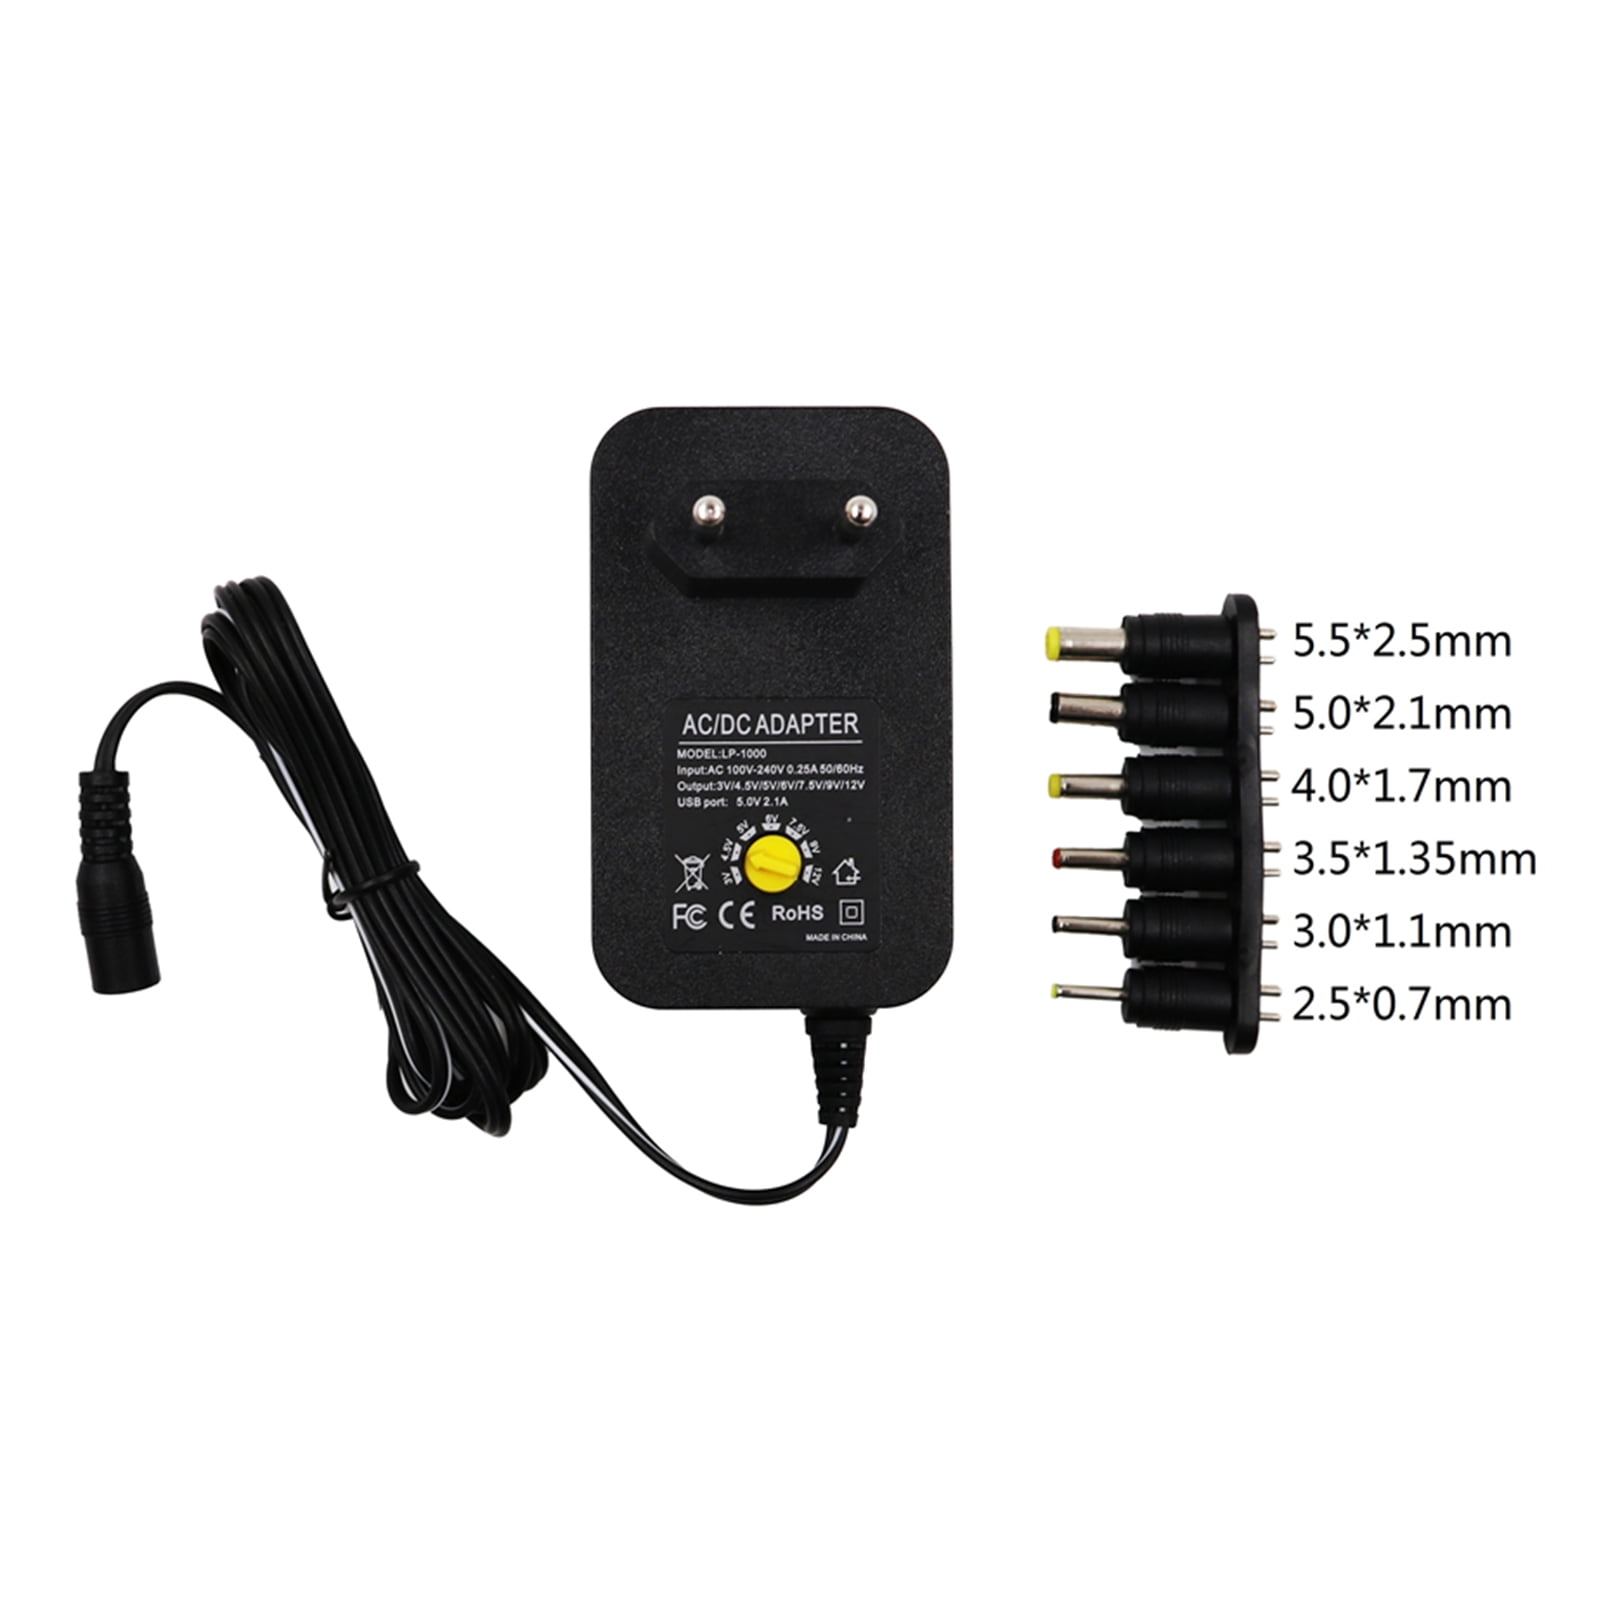 Details about   AC/DC 3V-24V Electrical Power Supply Adapter Charger Voltage Adjustable 2.5A 